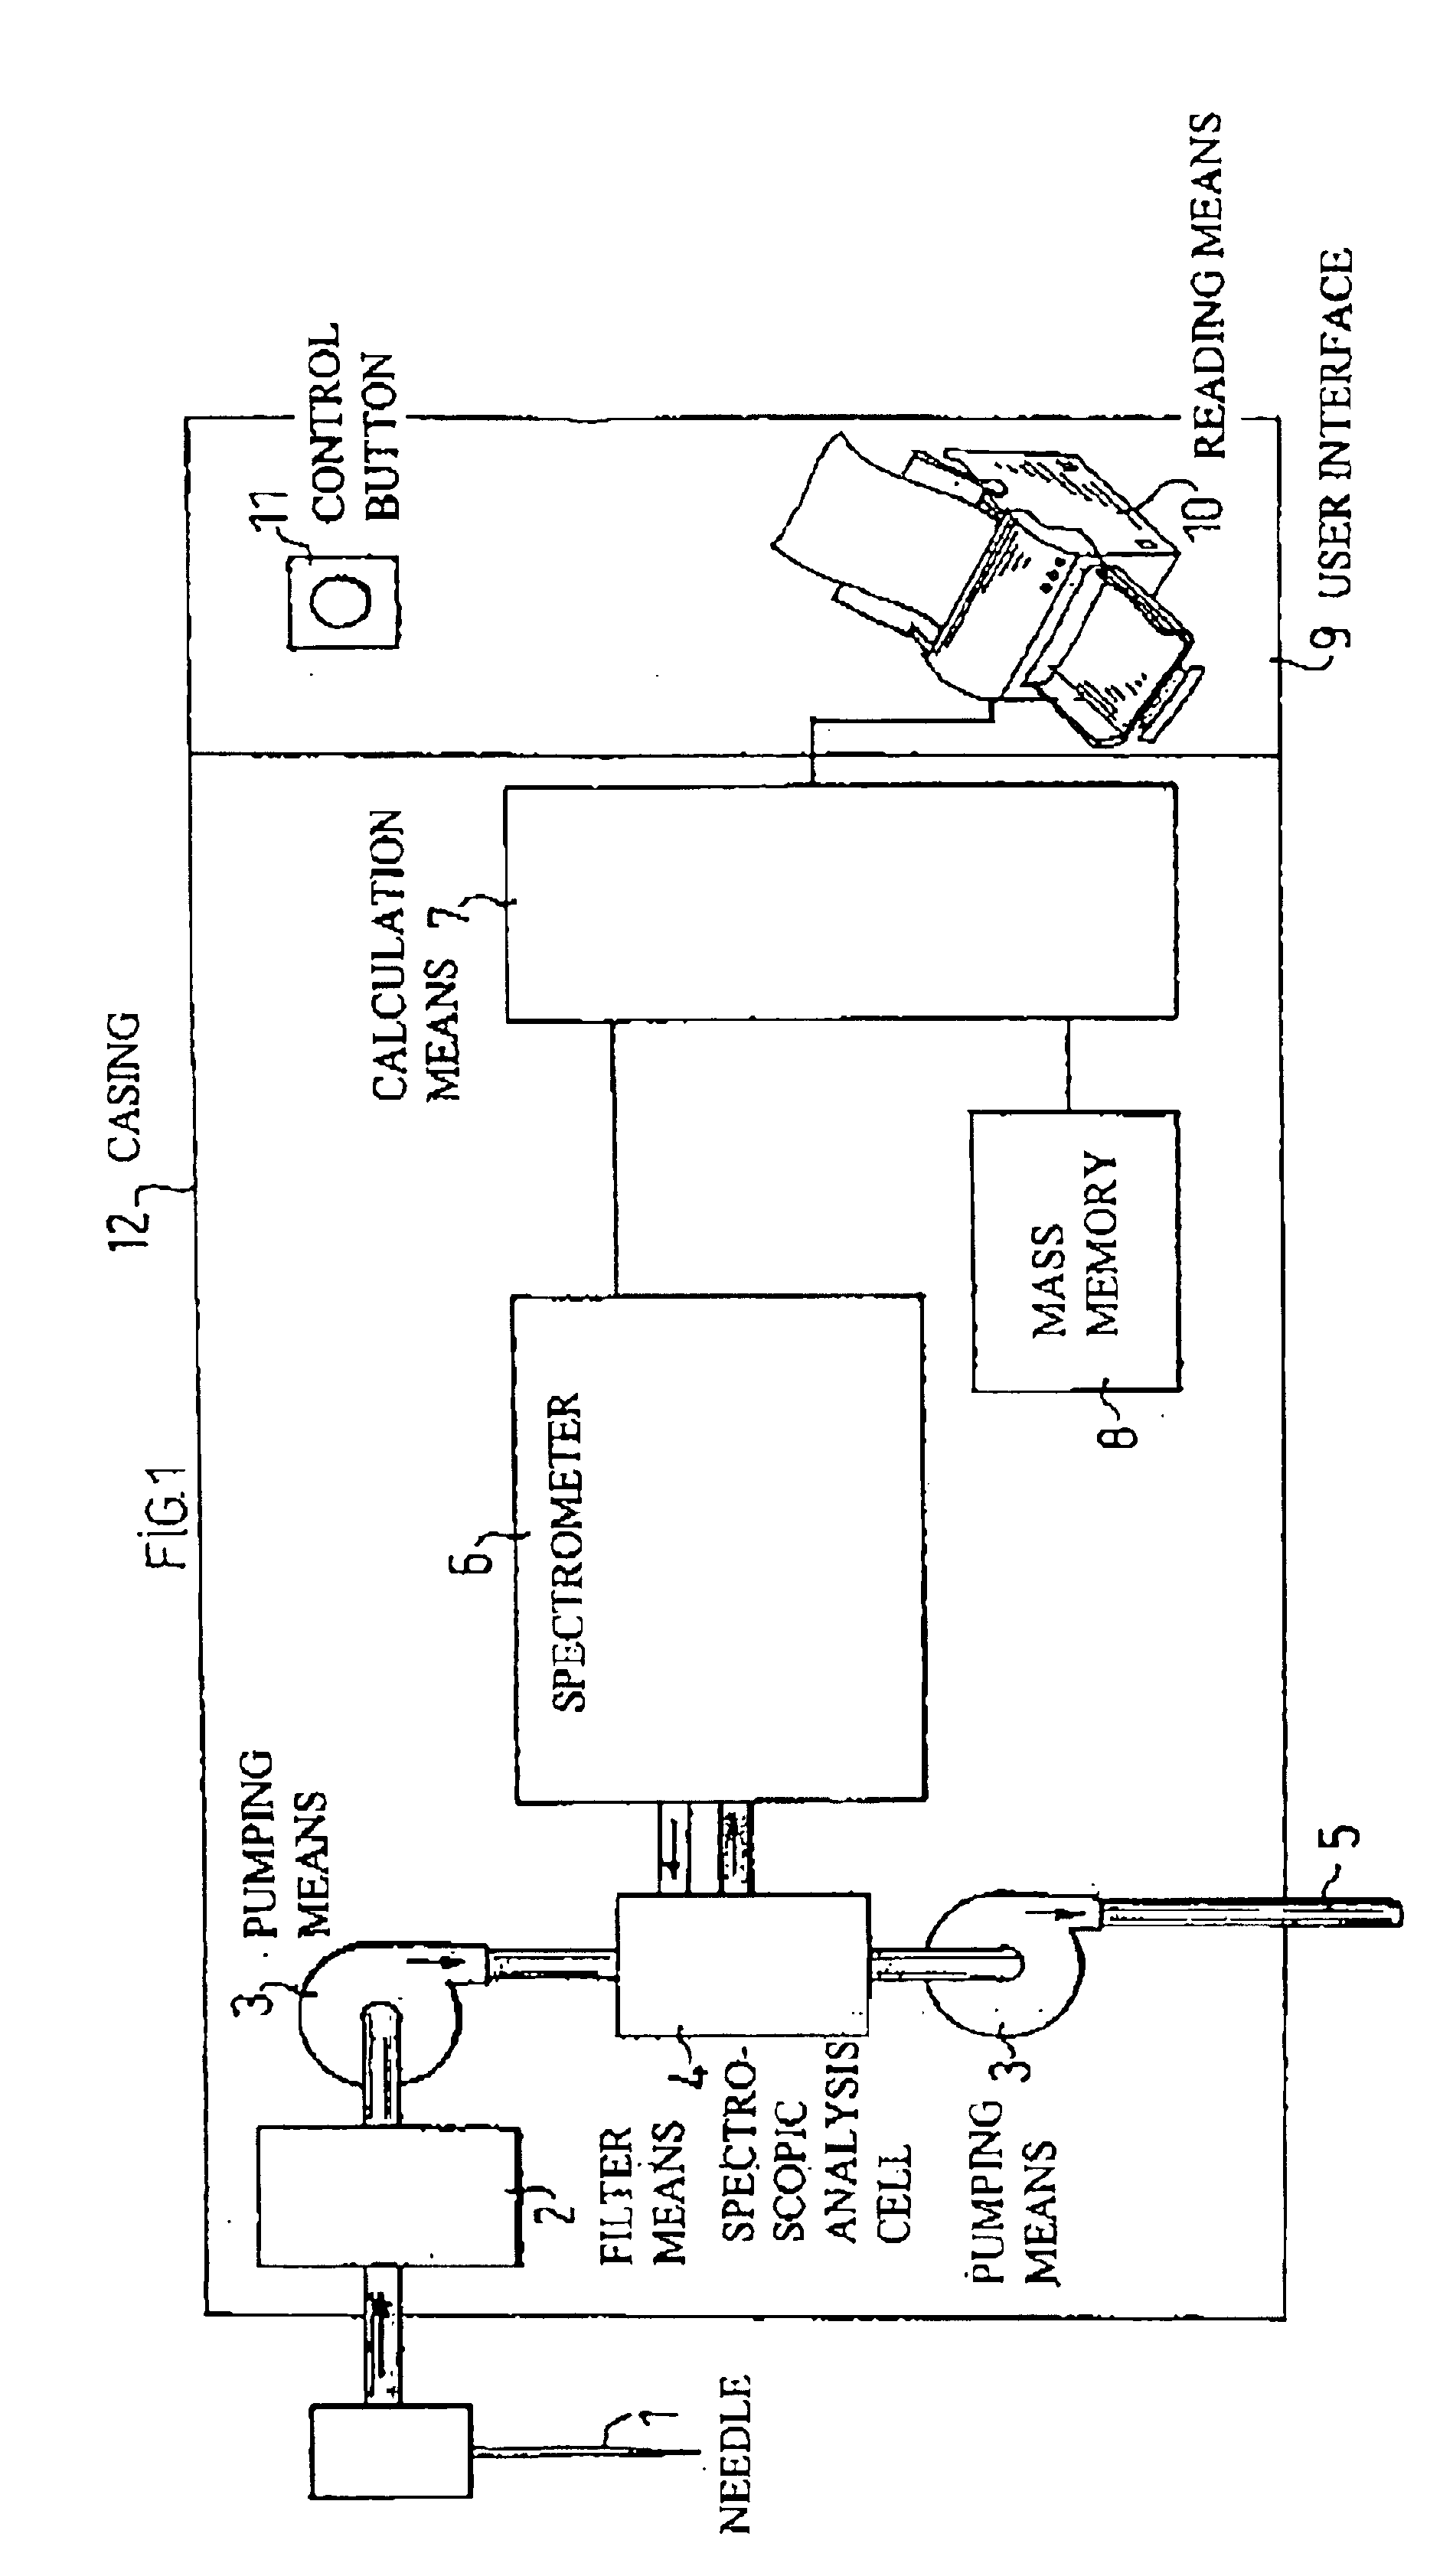 Method and device for objective qualitative analysis of grape must and/or wines using wideband infrared spectrometry